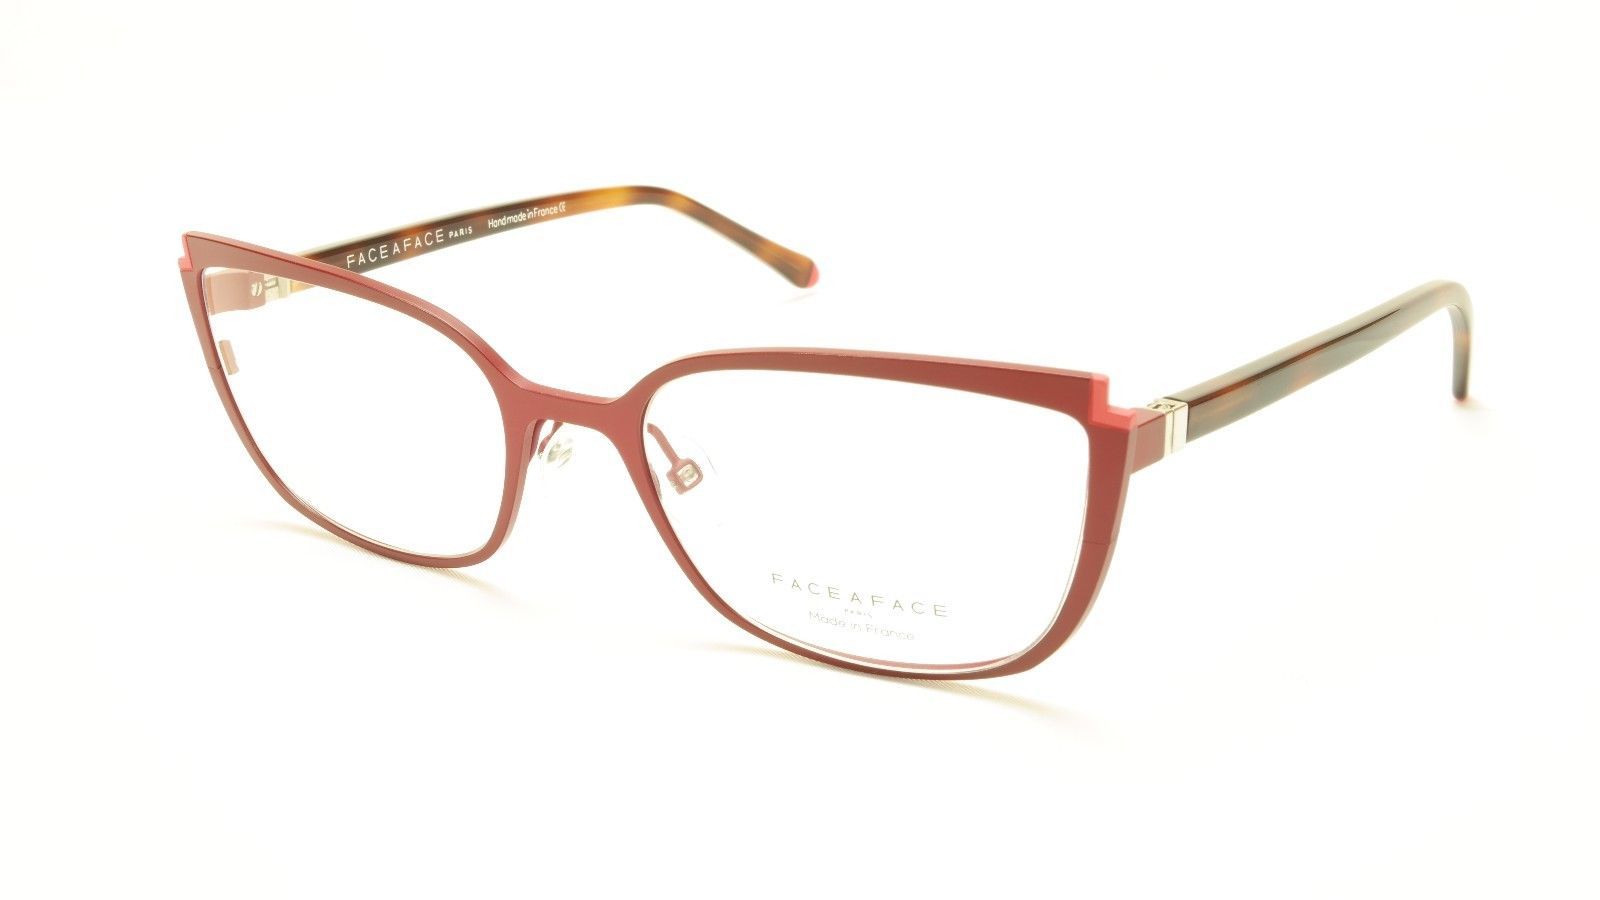 Face A Face Books 1 Col. 9641 Eyeglasses France Made 53-19-135 Authentic  - $430.02